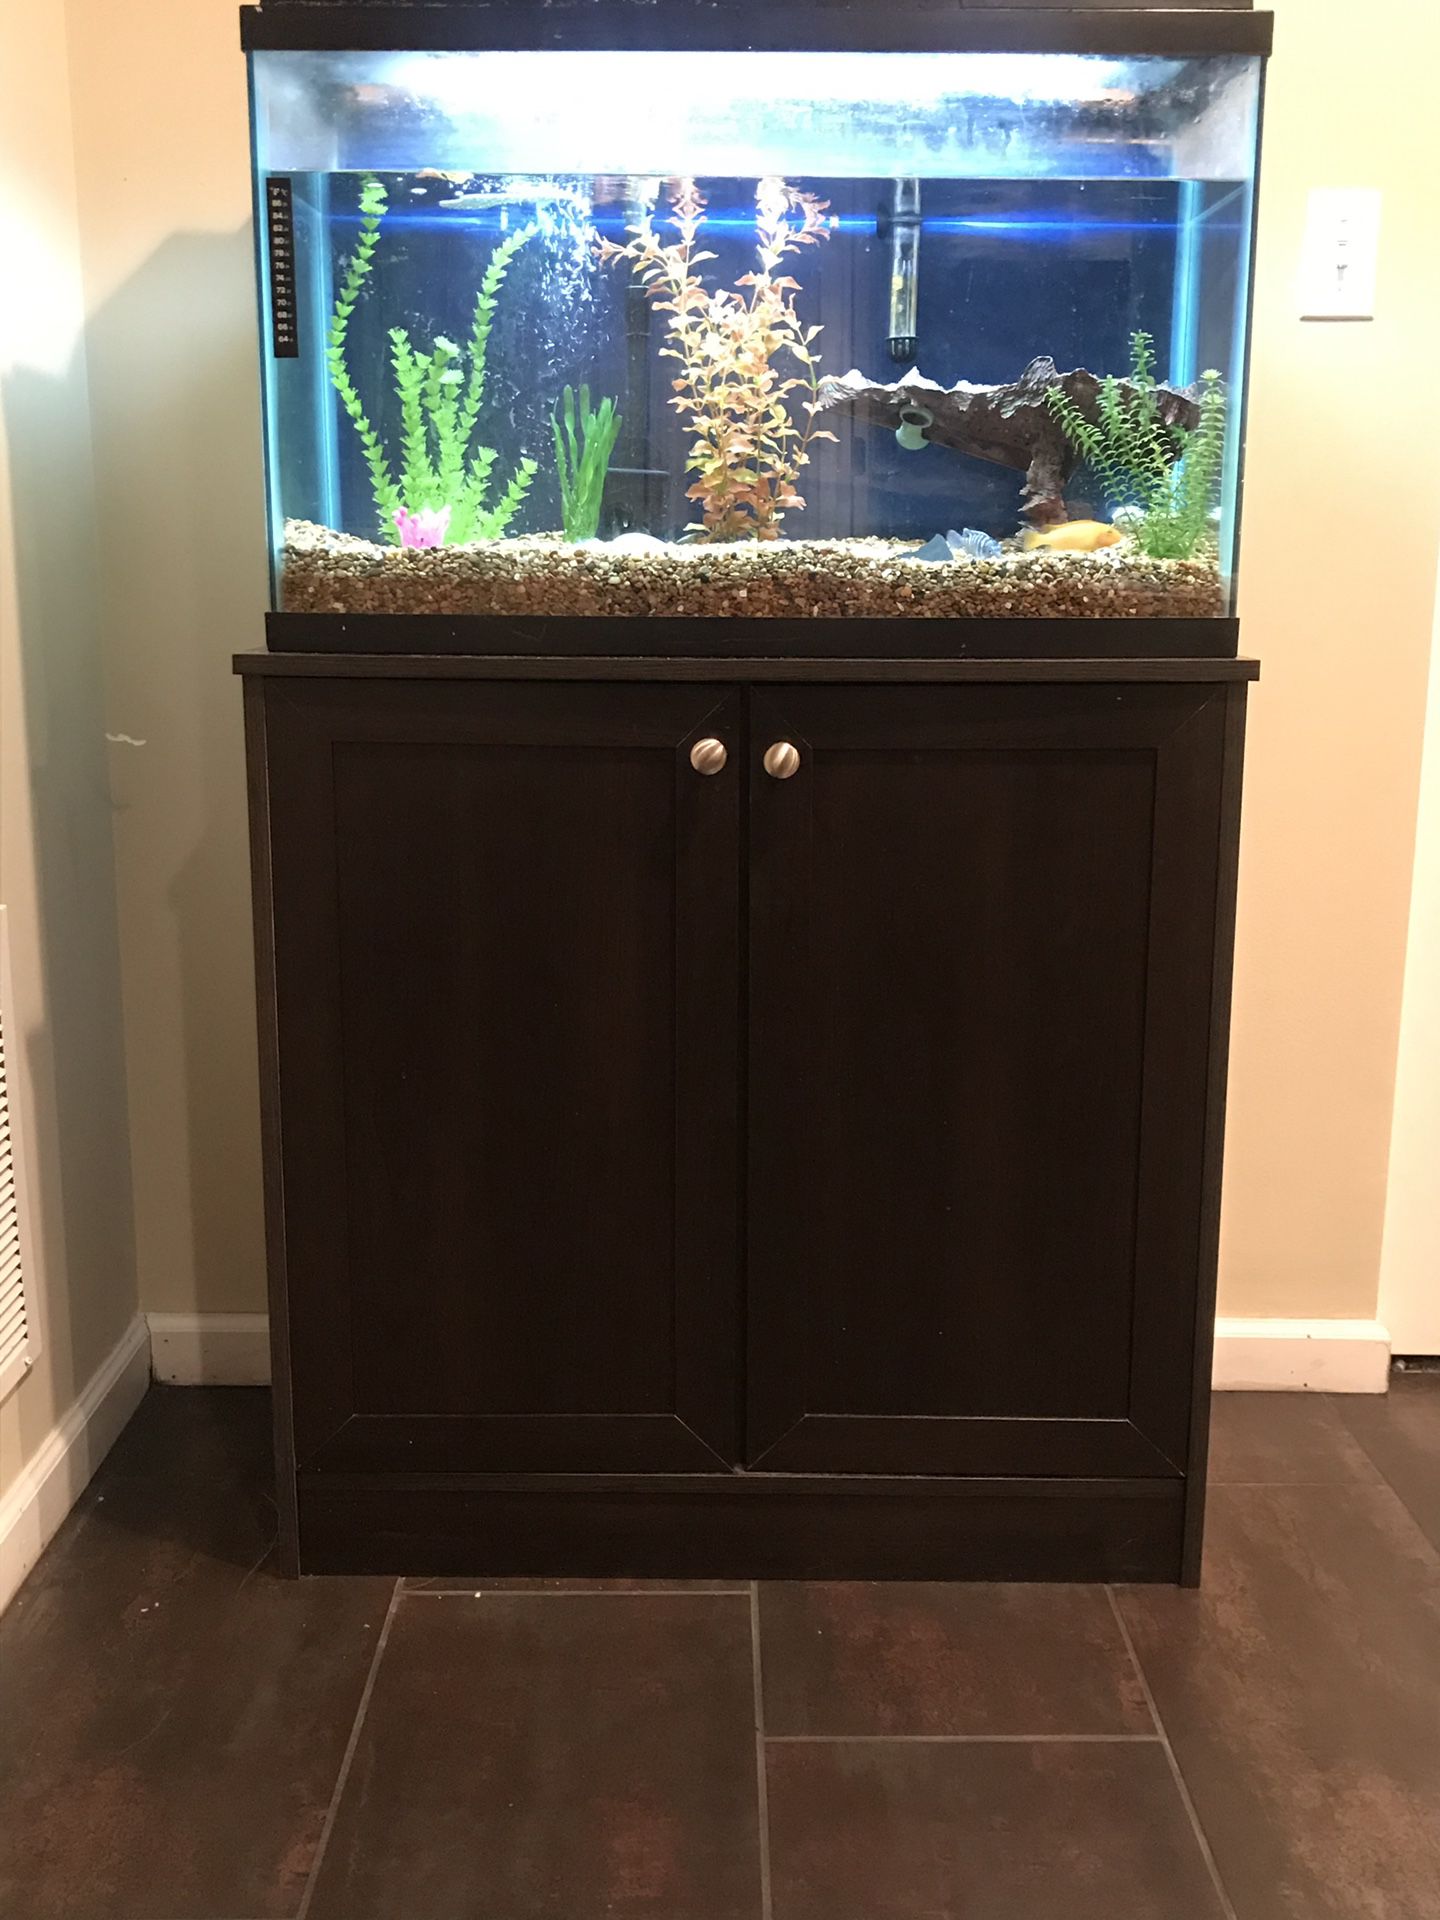 29 gallon fish take with stand. Includes everything in picture (including fish).